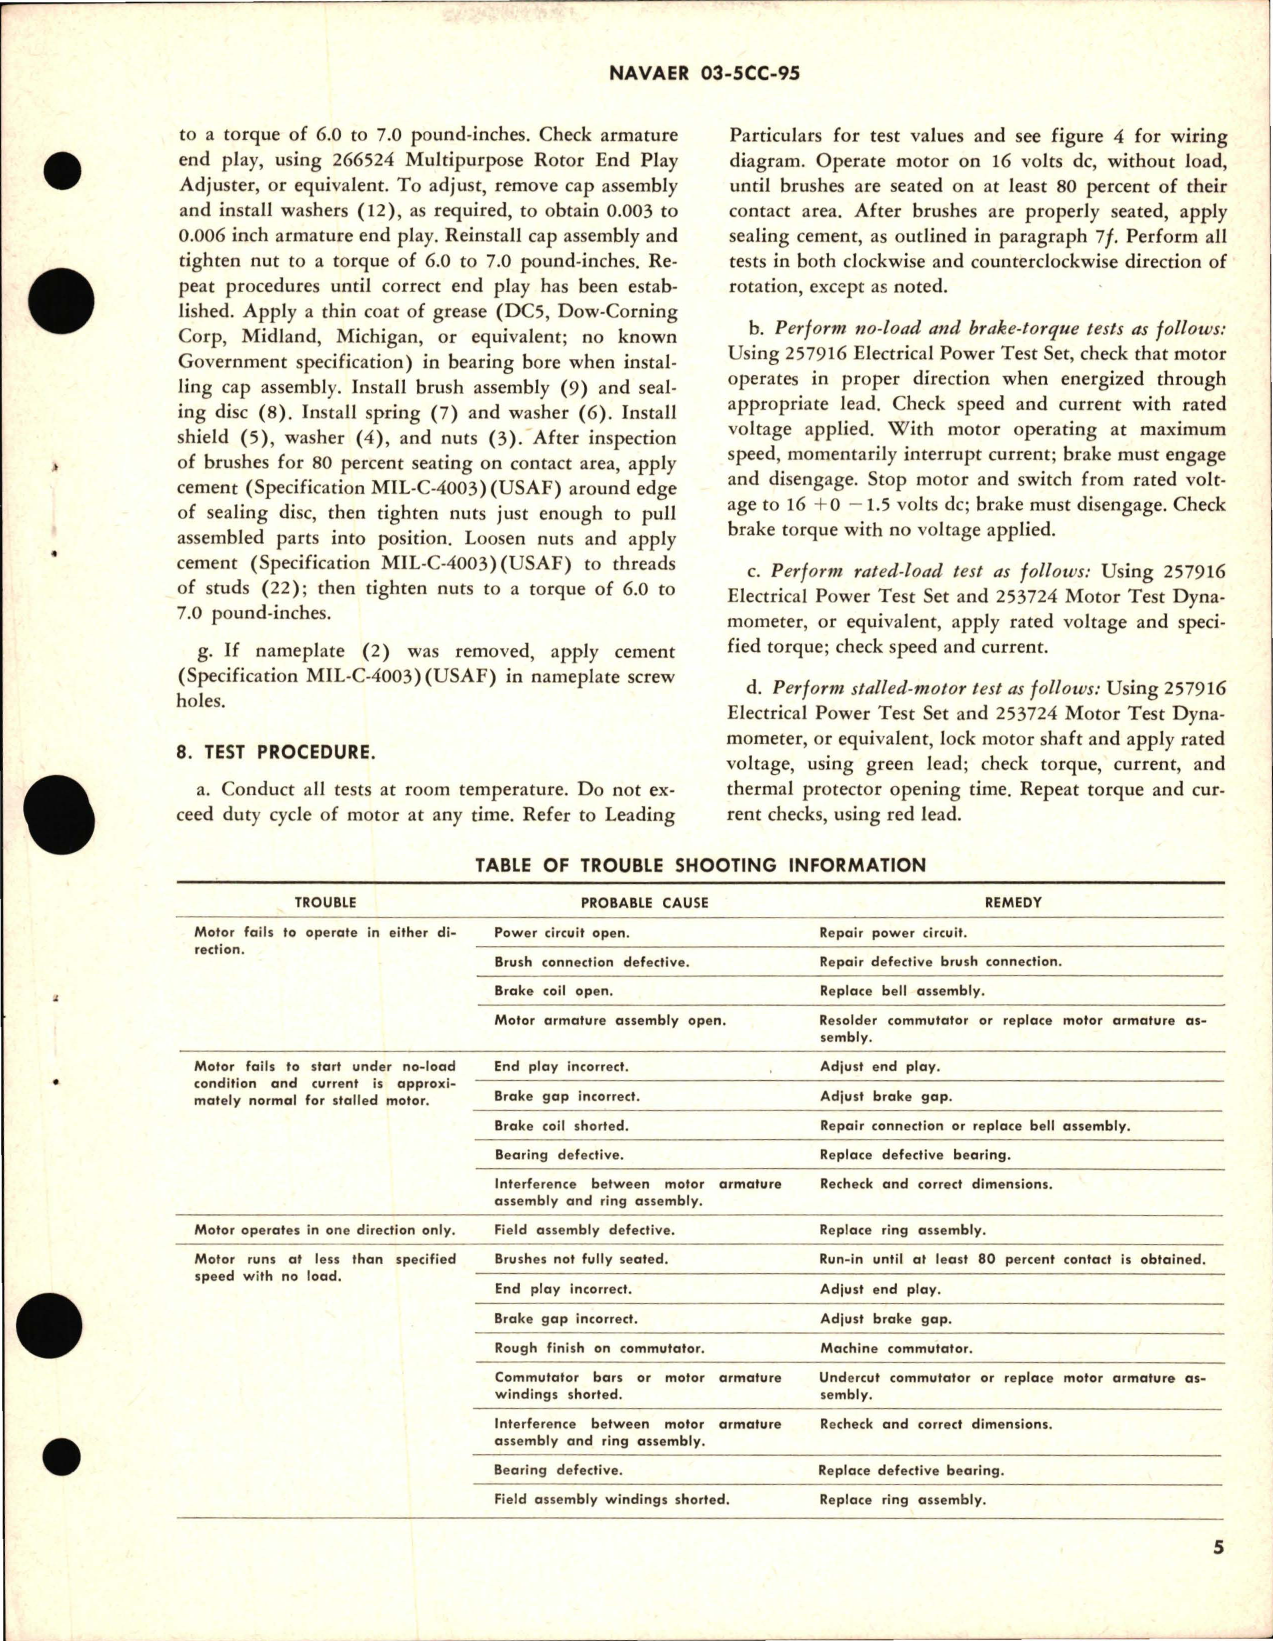 Sample page 5 from AirCorps Library document: Overhaul Instructions with Parts Breakdown for HP Pinion Shaft Direct Current Motor 0.04 Part 26675-4 